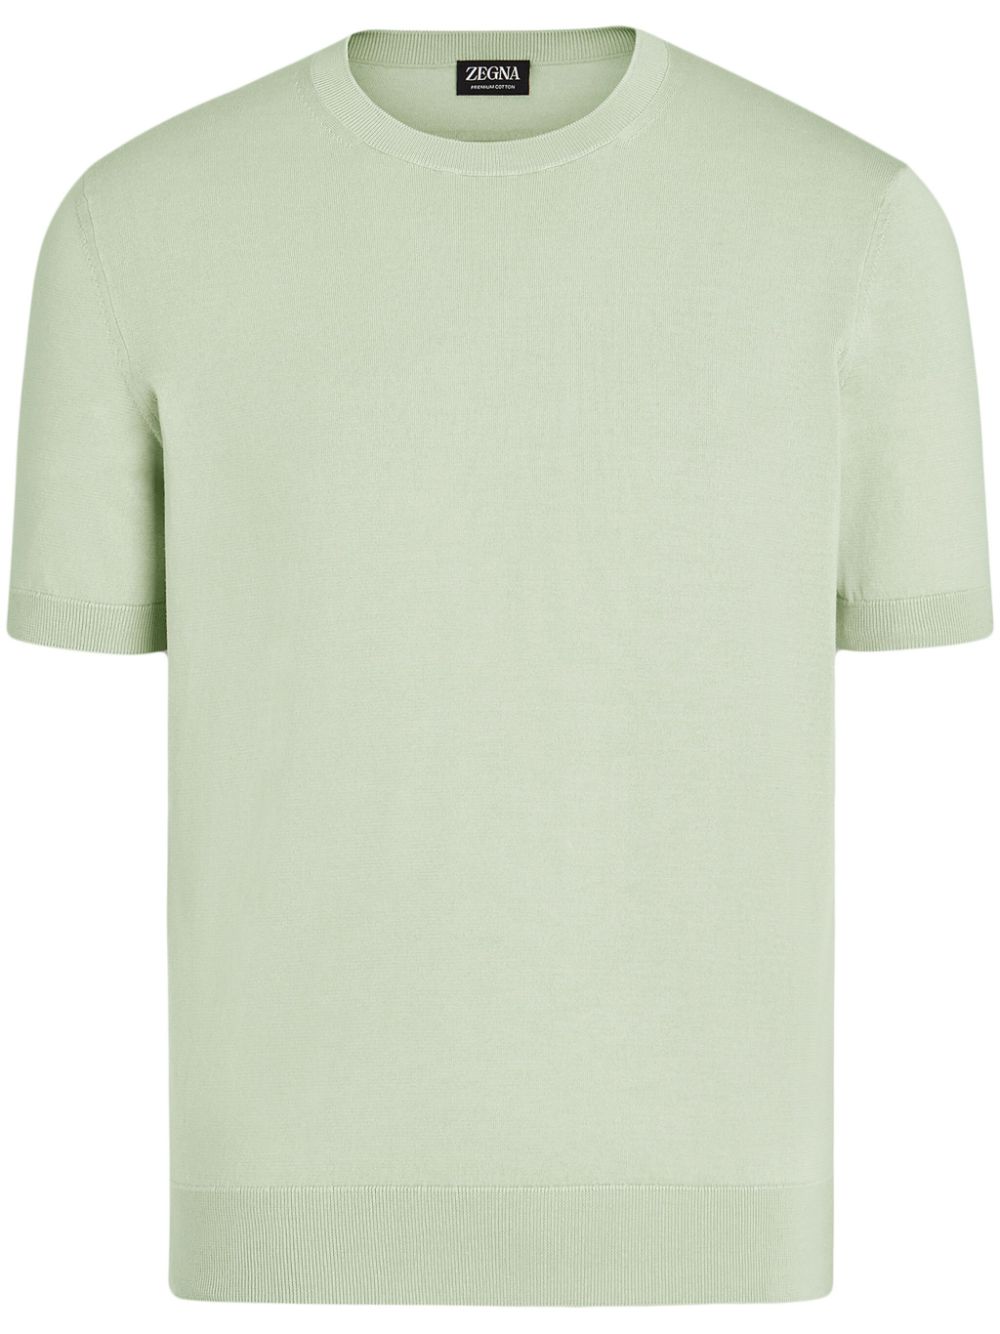 Zegna Fine-knit Cotton T-shirt In Green